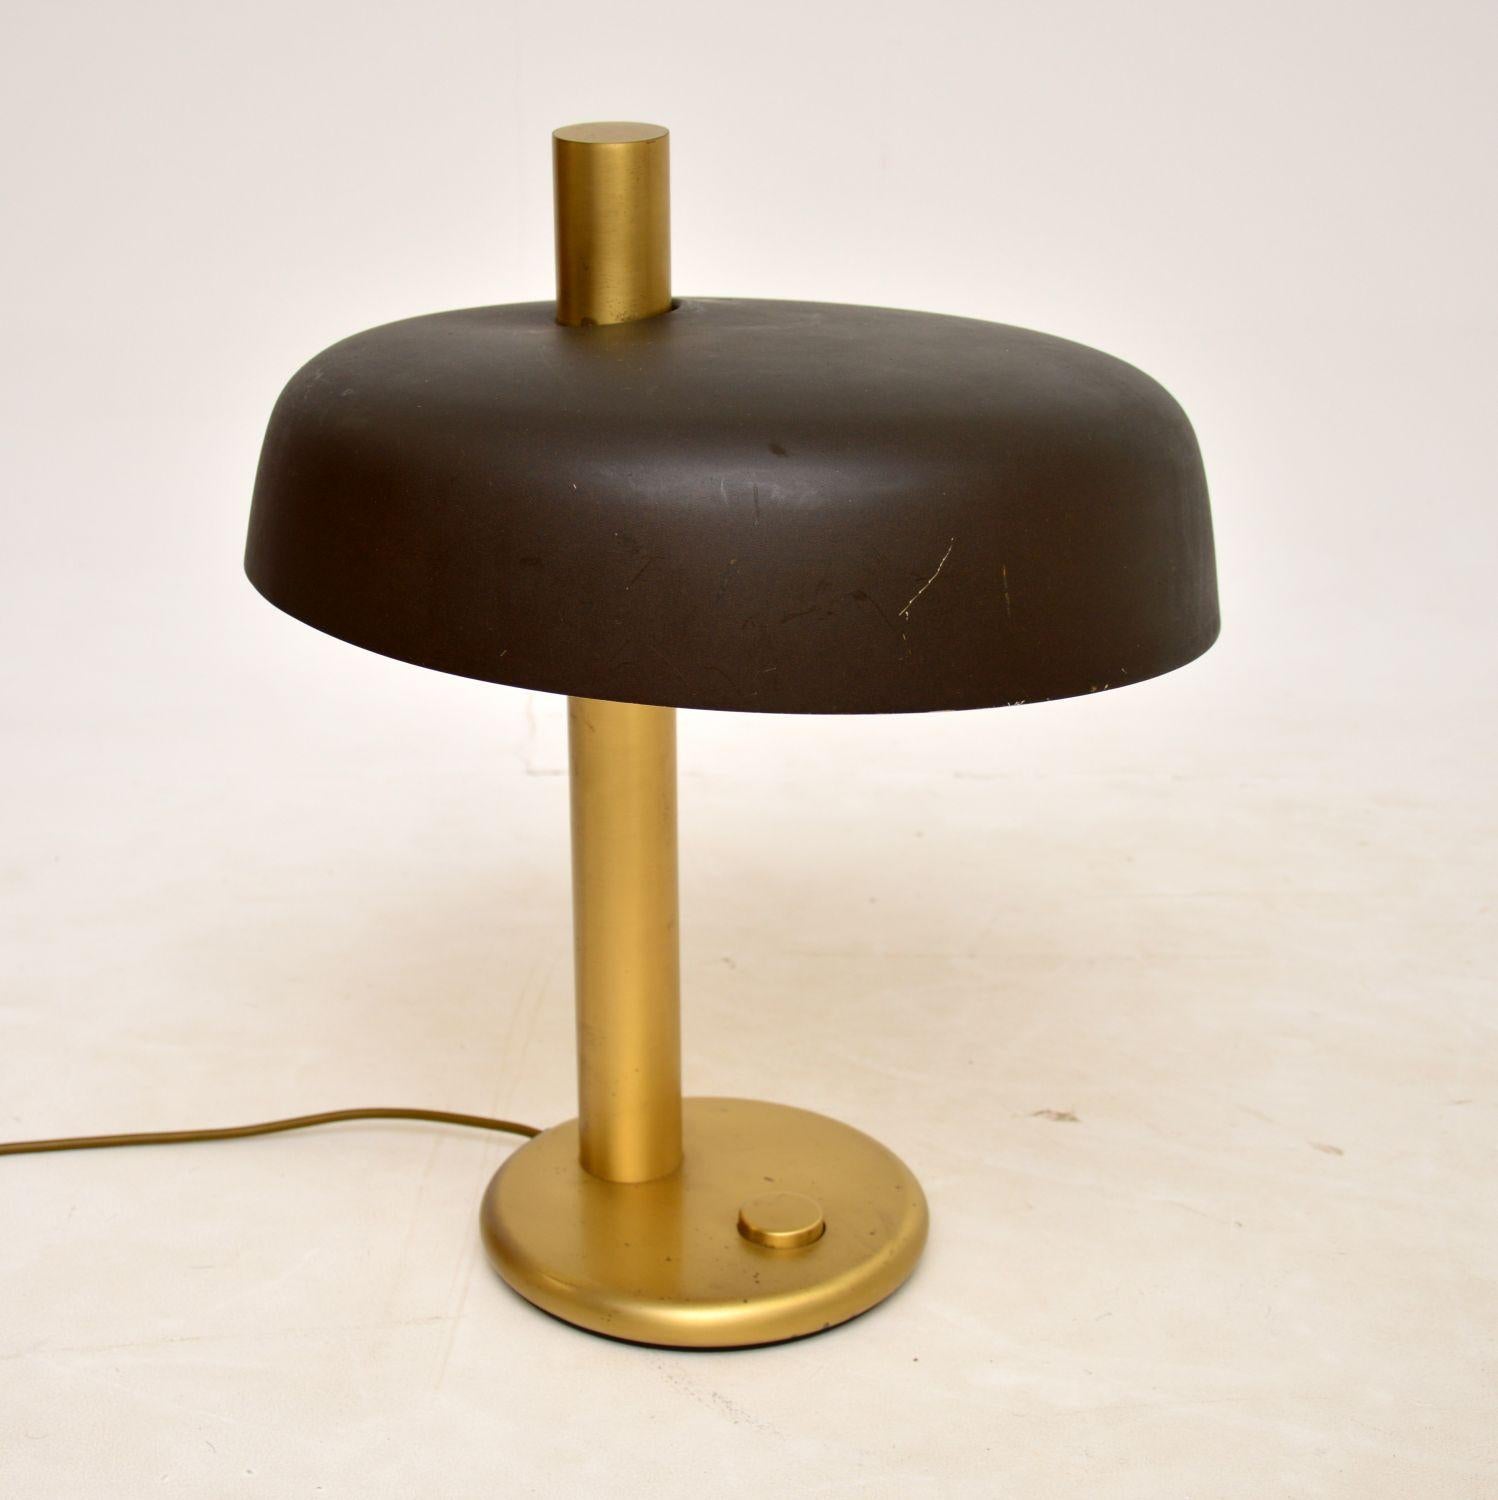 A very stylish and unusual vintage desk lamp in brass with a dark metal shade. This was recently imported from Italy, it dates from around the 1970s.

The quality is fantastic, with a very bold and interesting design. The shade is fixed and is set